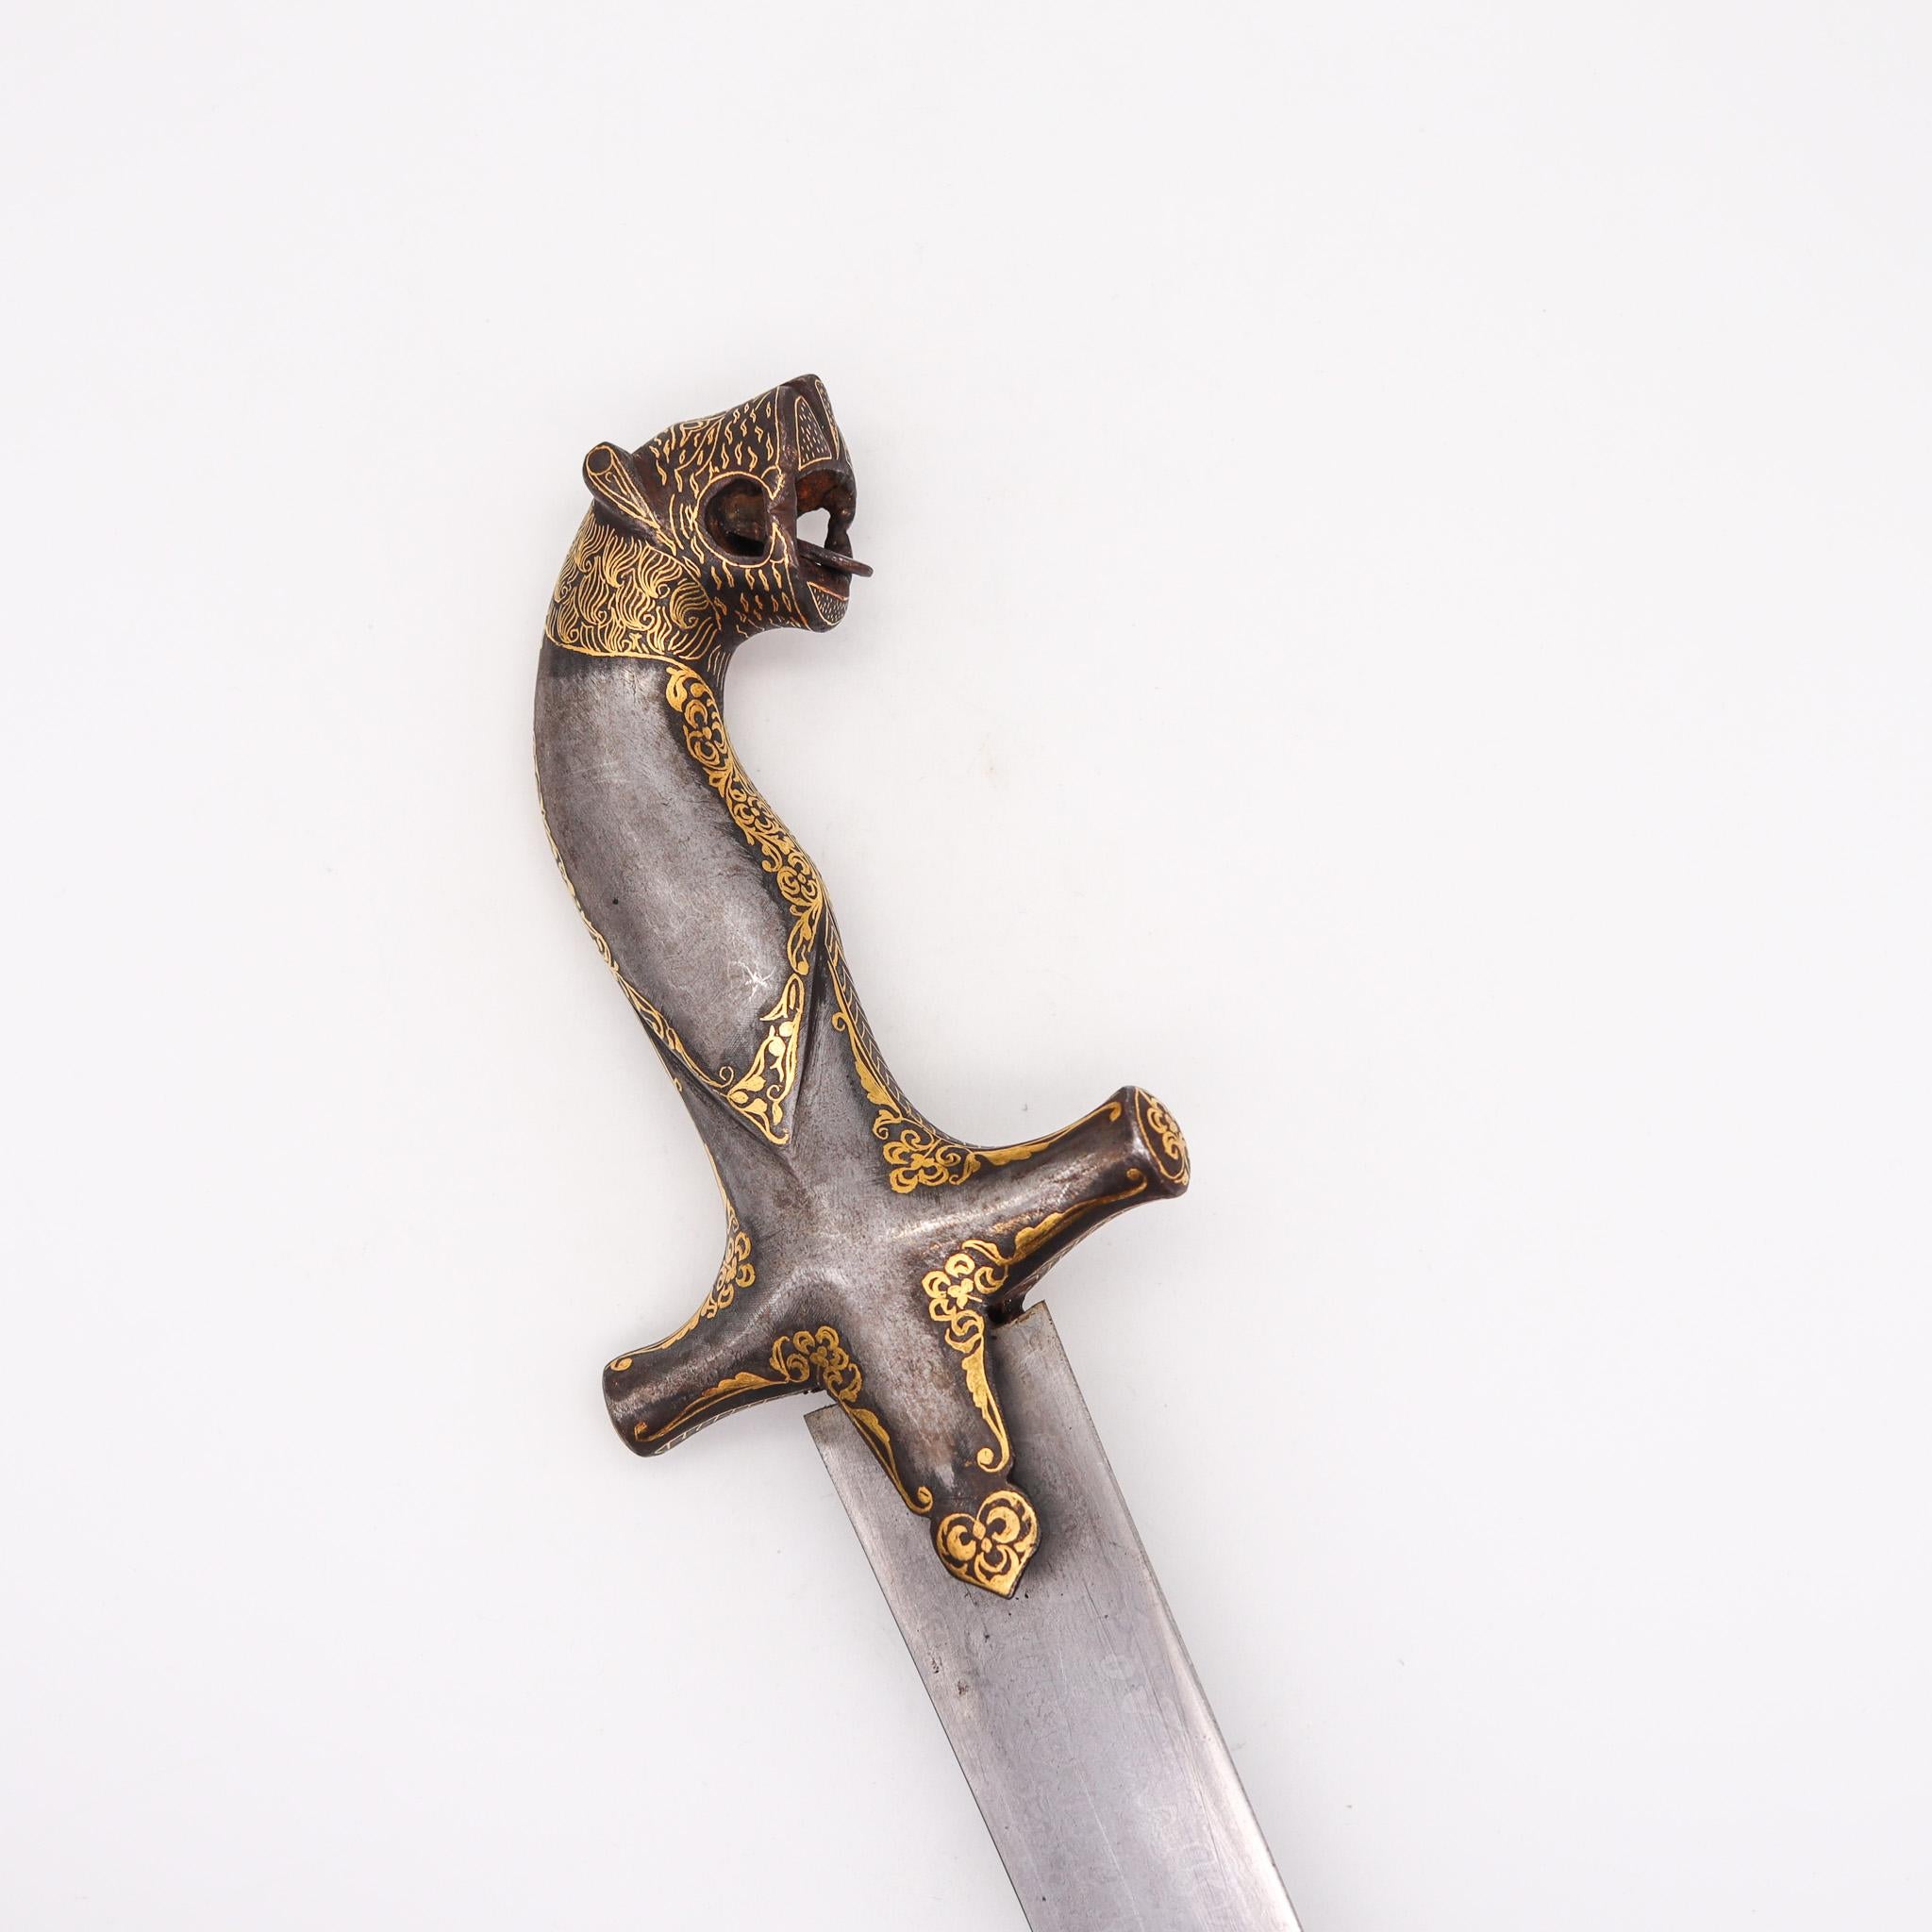 Damascene forged steel dagger with sheath.

Beautiful dagger (Jambiya) from the Ottoman empire, of Turkish / Arab origin, circa early 1800's. Created with forged Damascus wootz steel and damascene of 24 carats yellow gold. It is composed by three